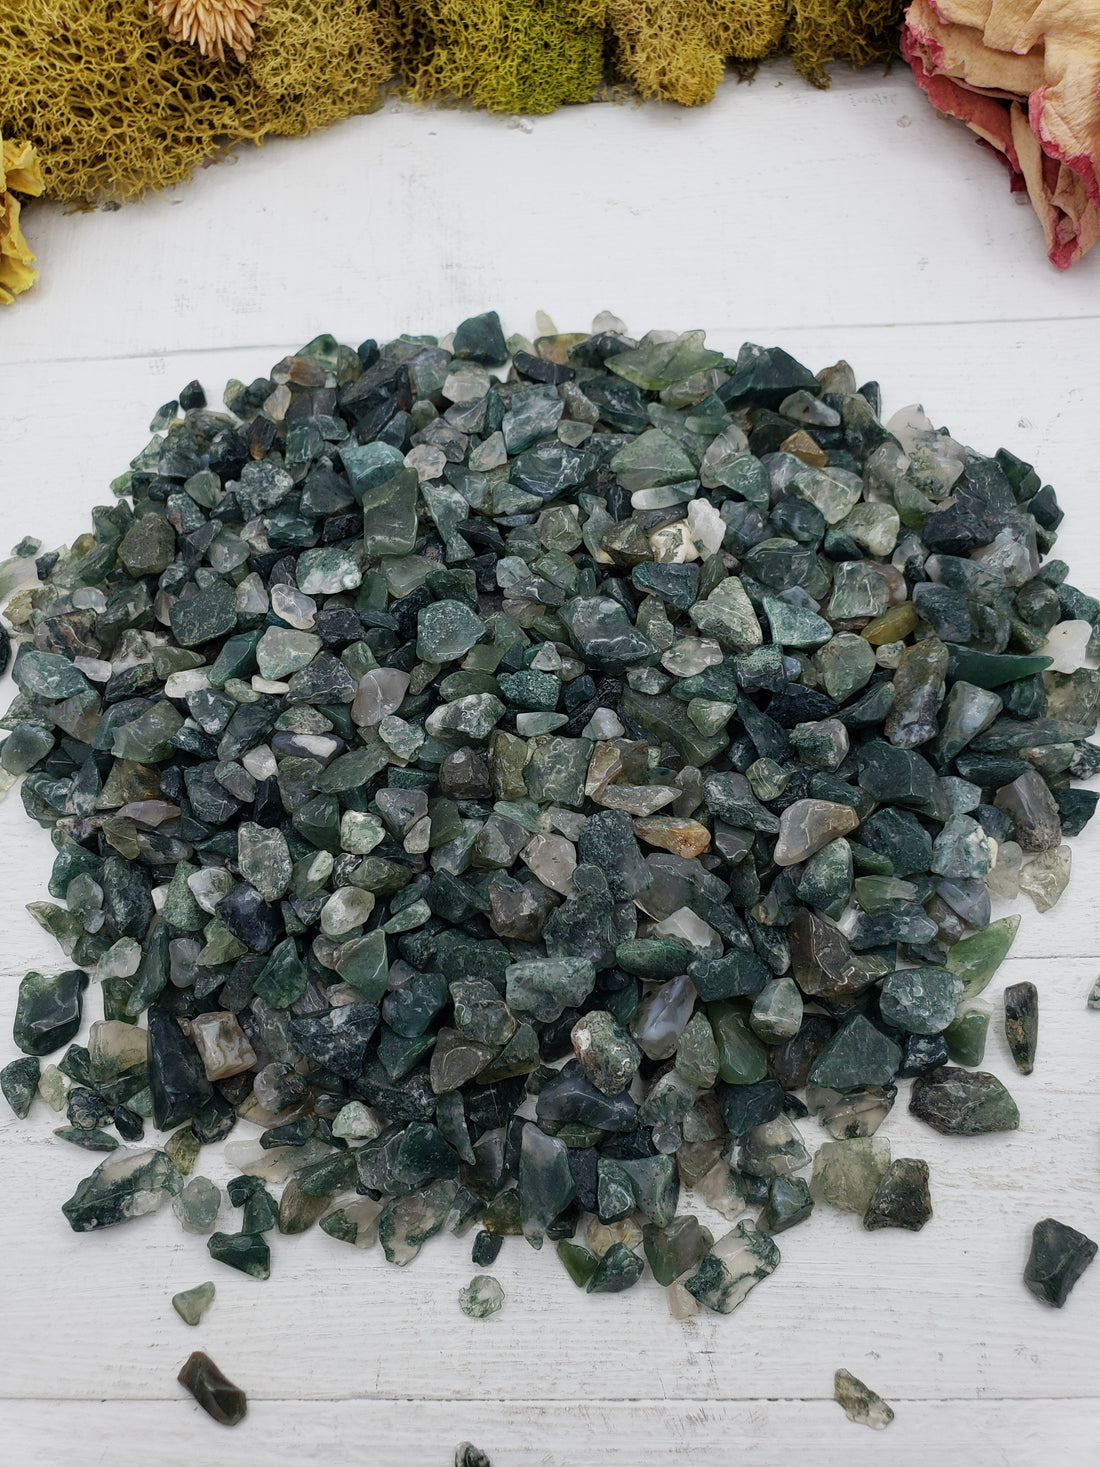 Eight ounces of green moss agate chips on display